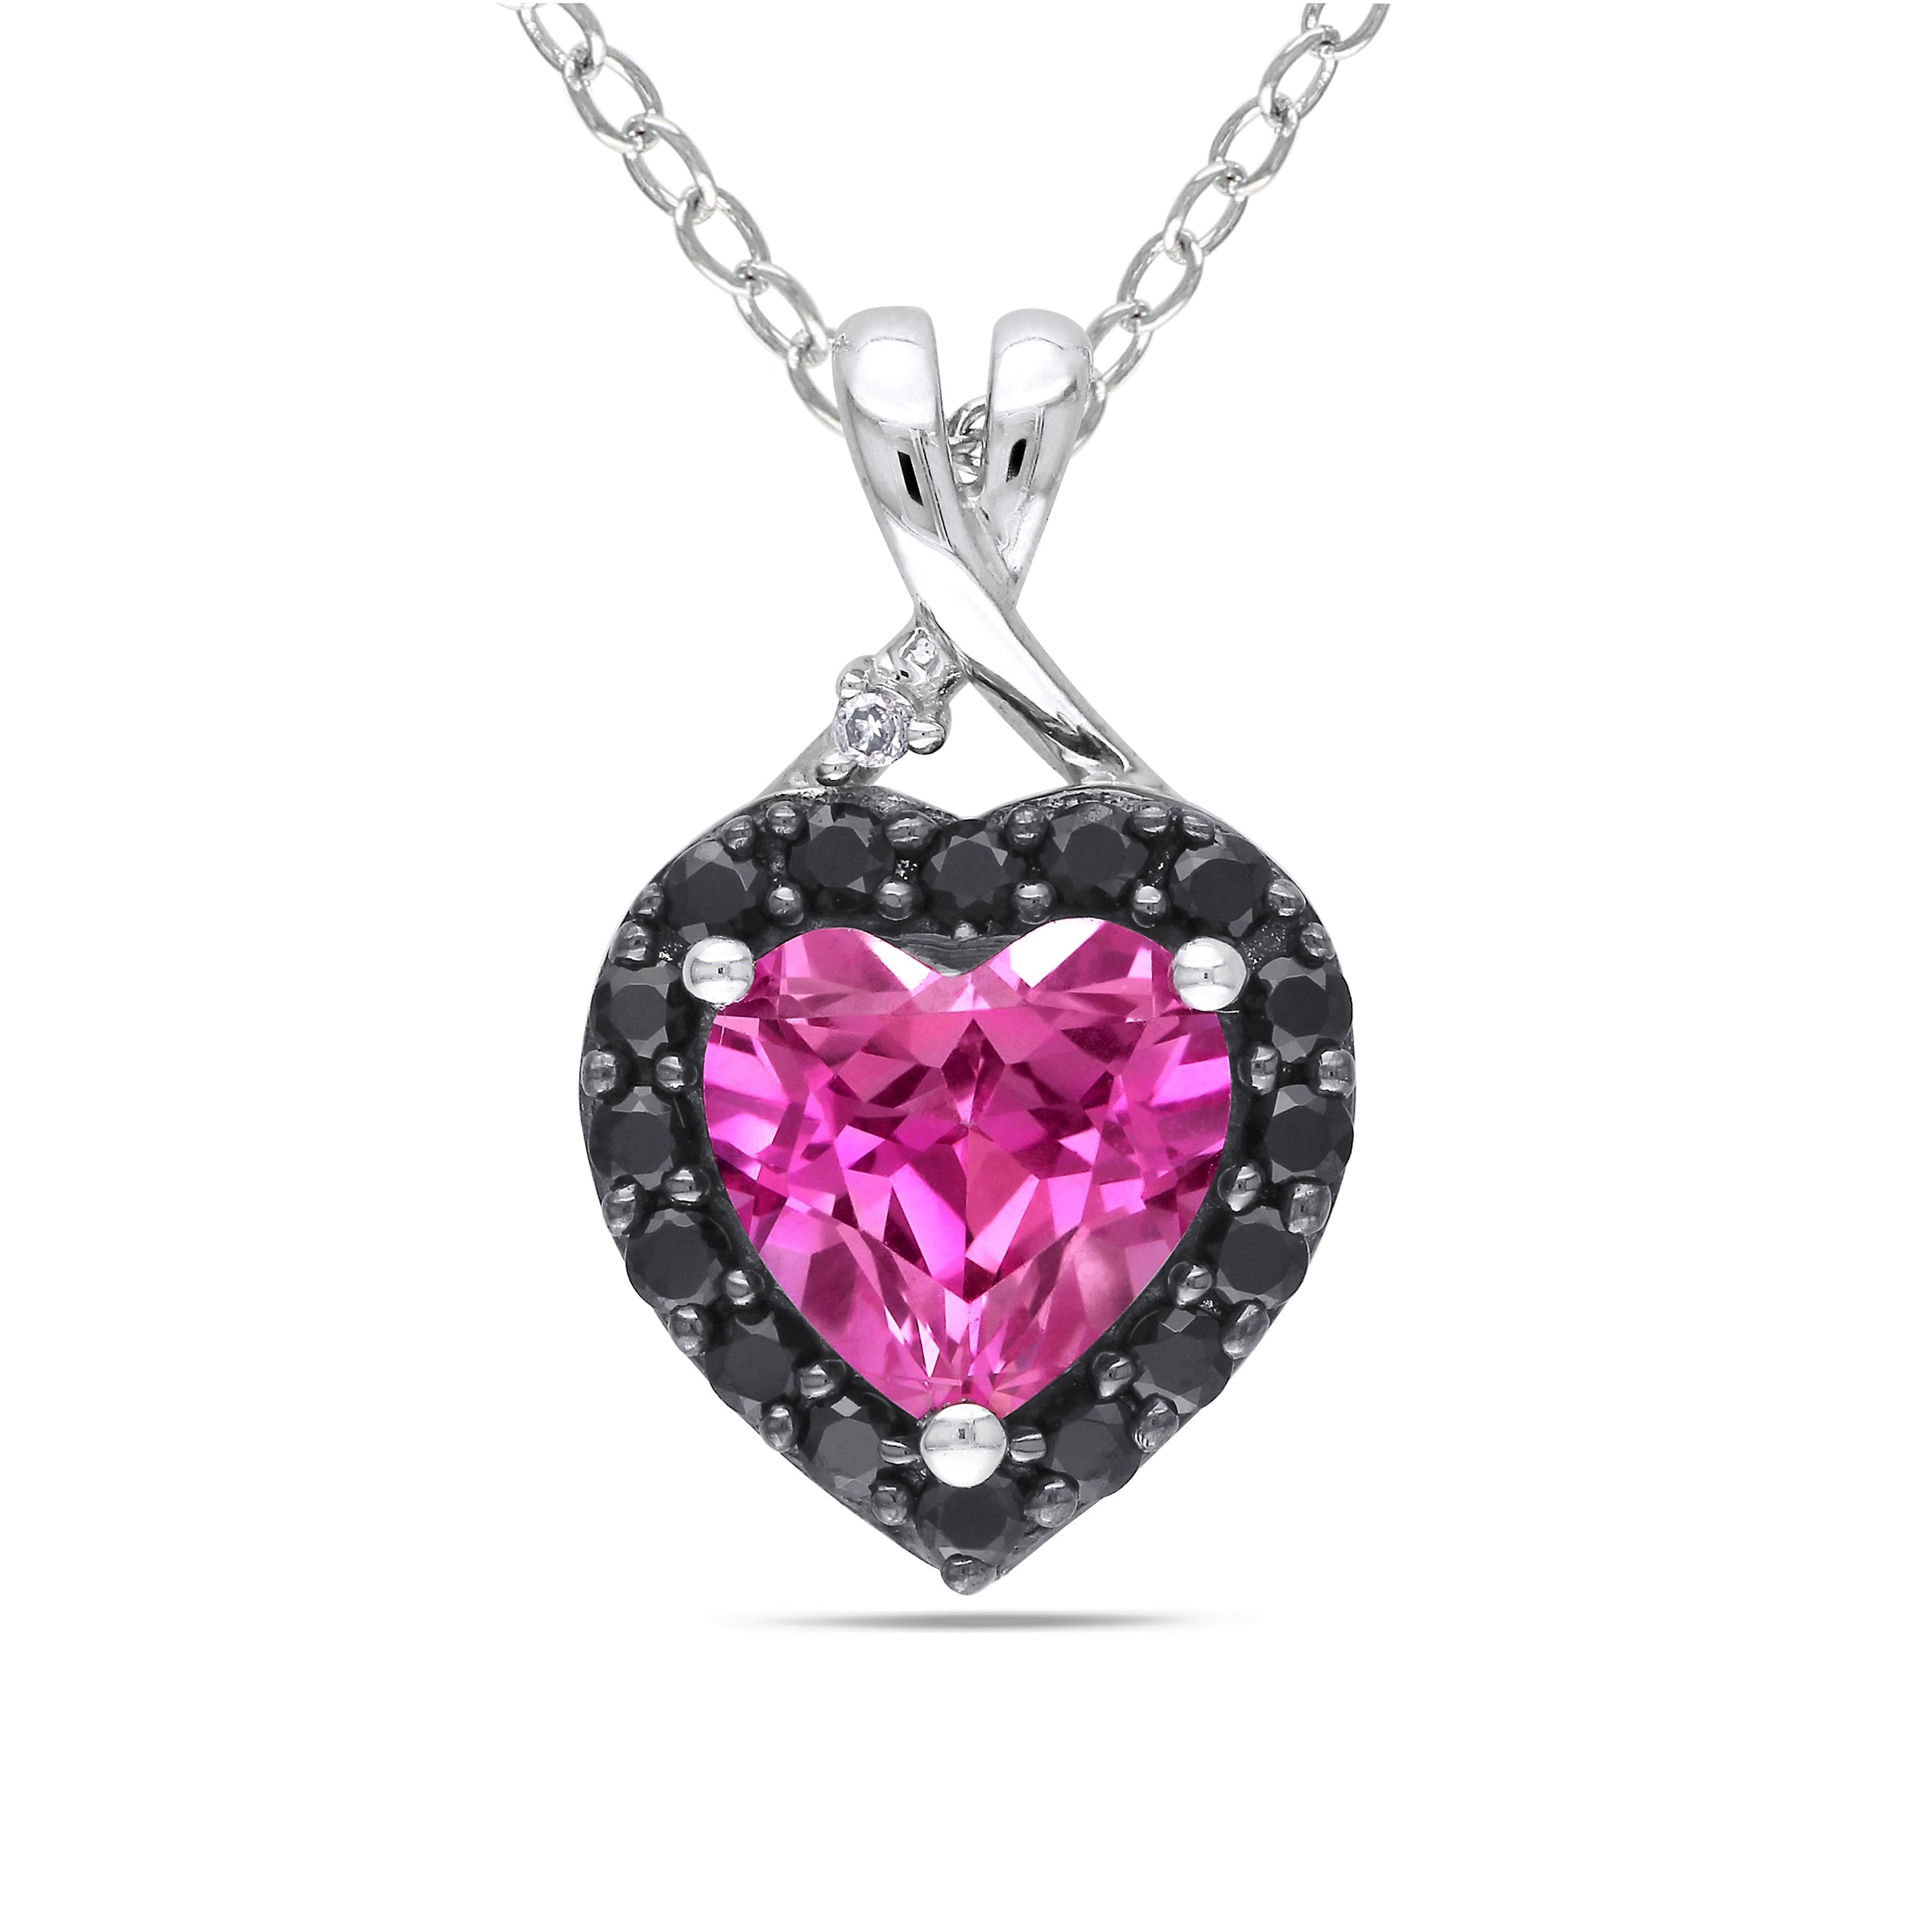 Mimi & Max Created Pink Sapphire, Black Spinel And Diamond Heart Necklace In Sterling Silver In Neutral